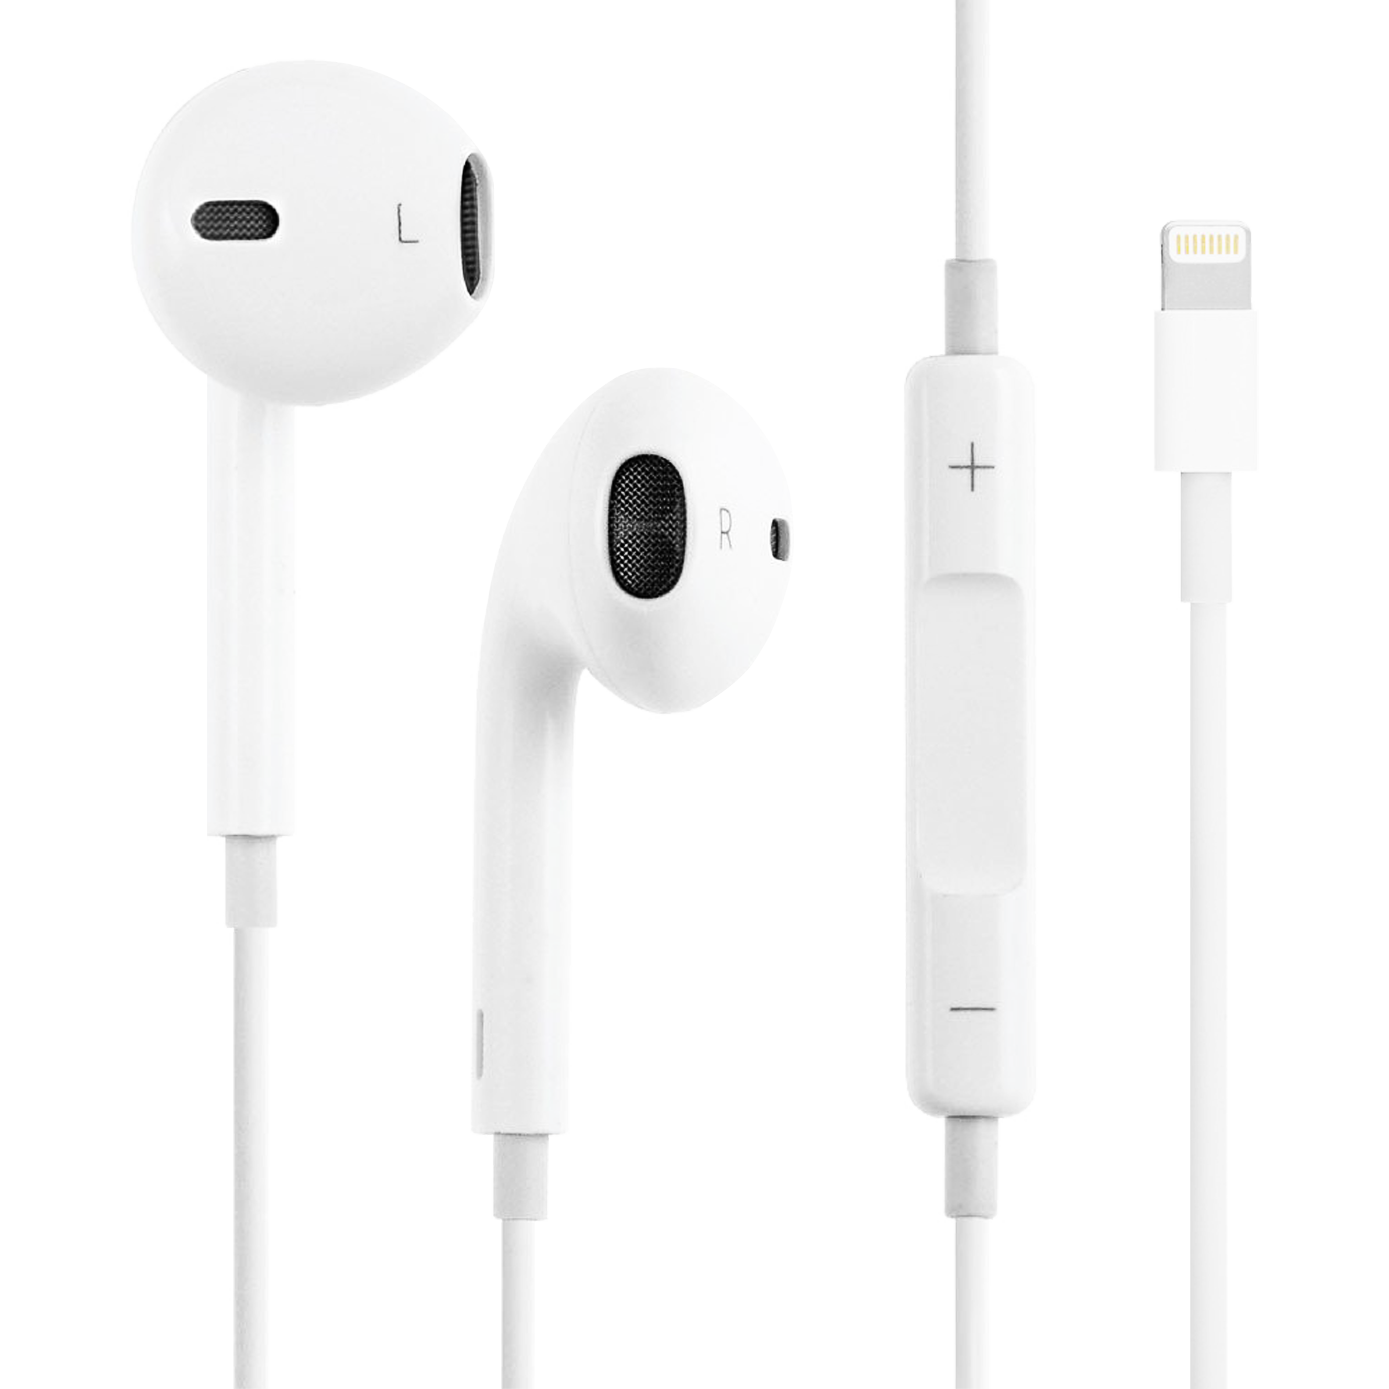 Buy EarPods with Lightning Connector